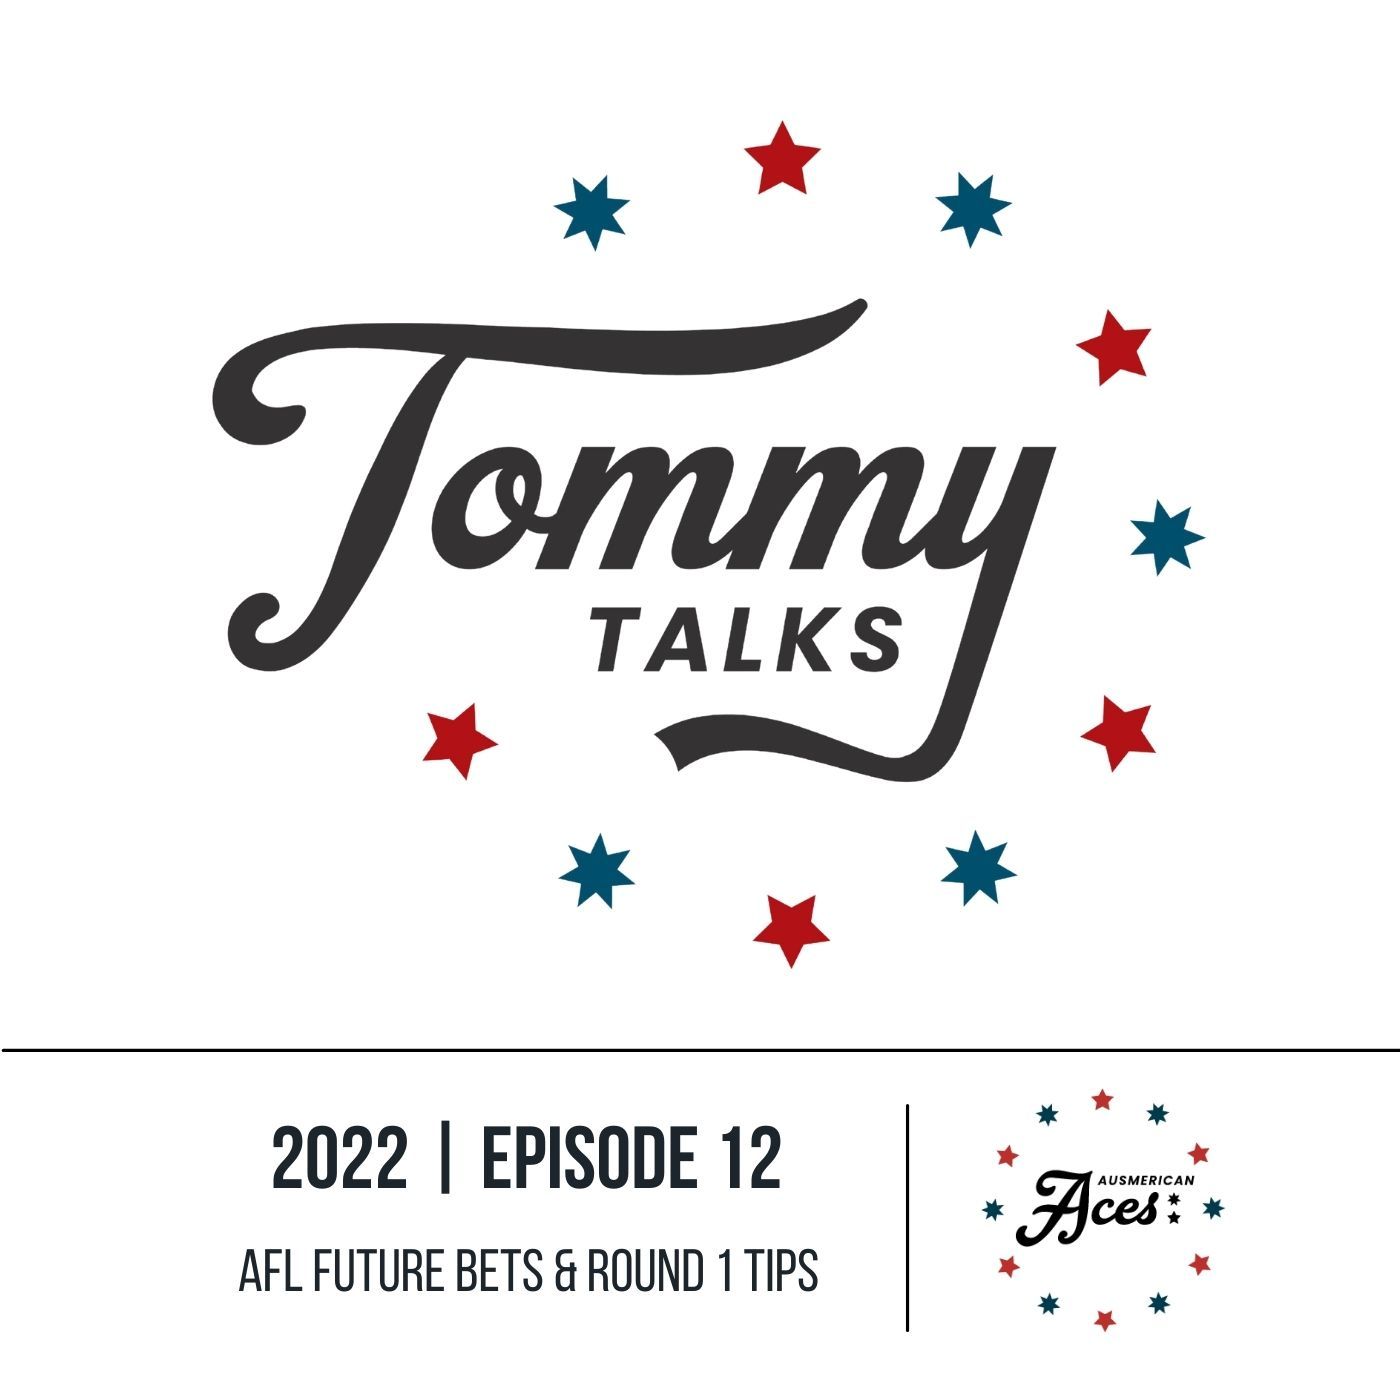 Tommy Talks AFL Future bets & Round 1 tips with Former AFL players David Armitage & Jono O'Rourke.